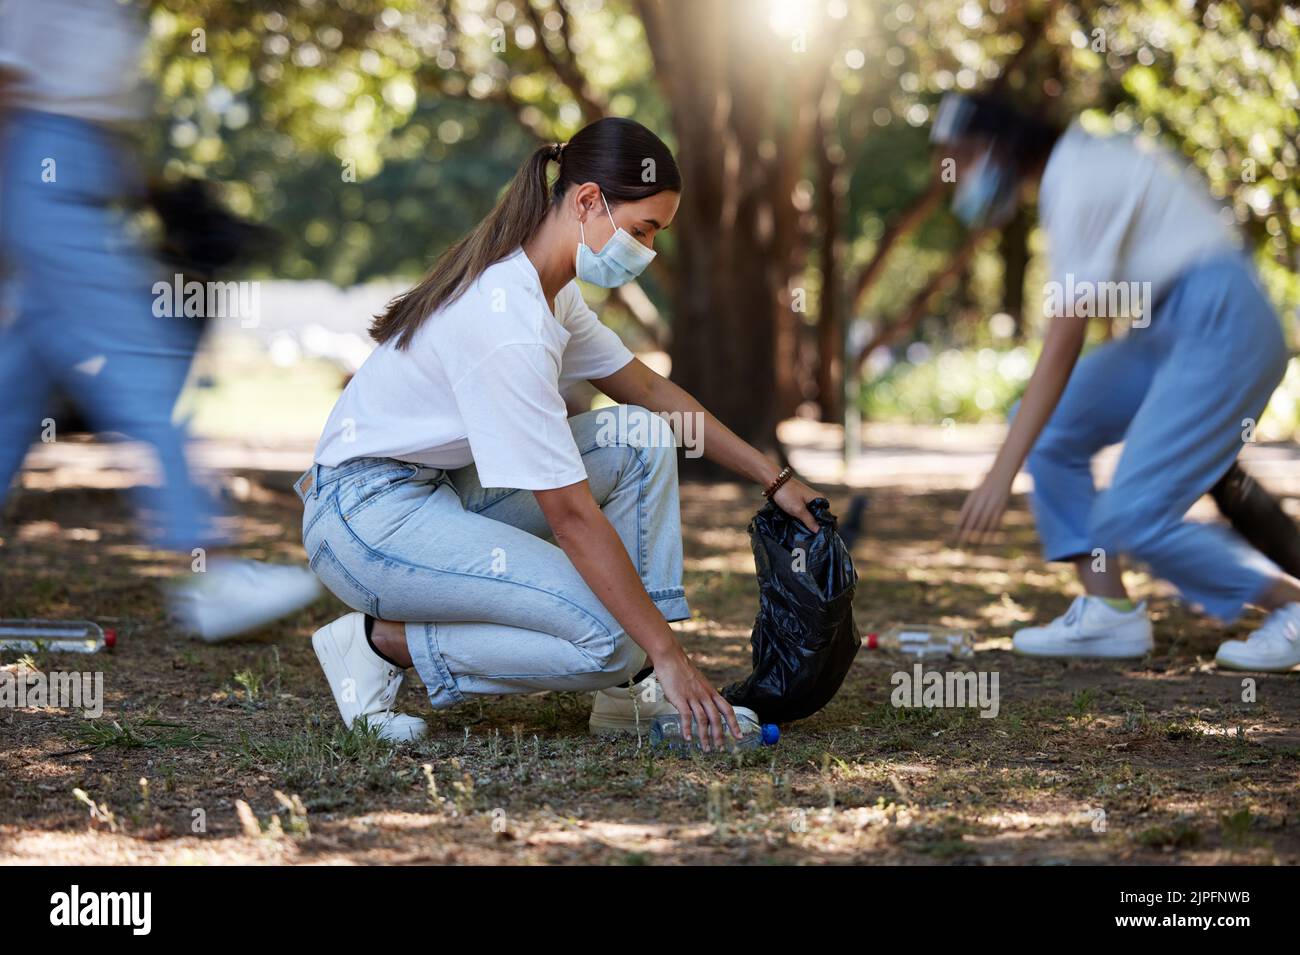 Volunteer, recycle and reduce waste by picking up litter, dirt and garbage outdoors in a park during covid. A young team of female NGO activists Stock Photo